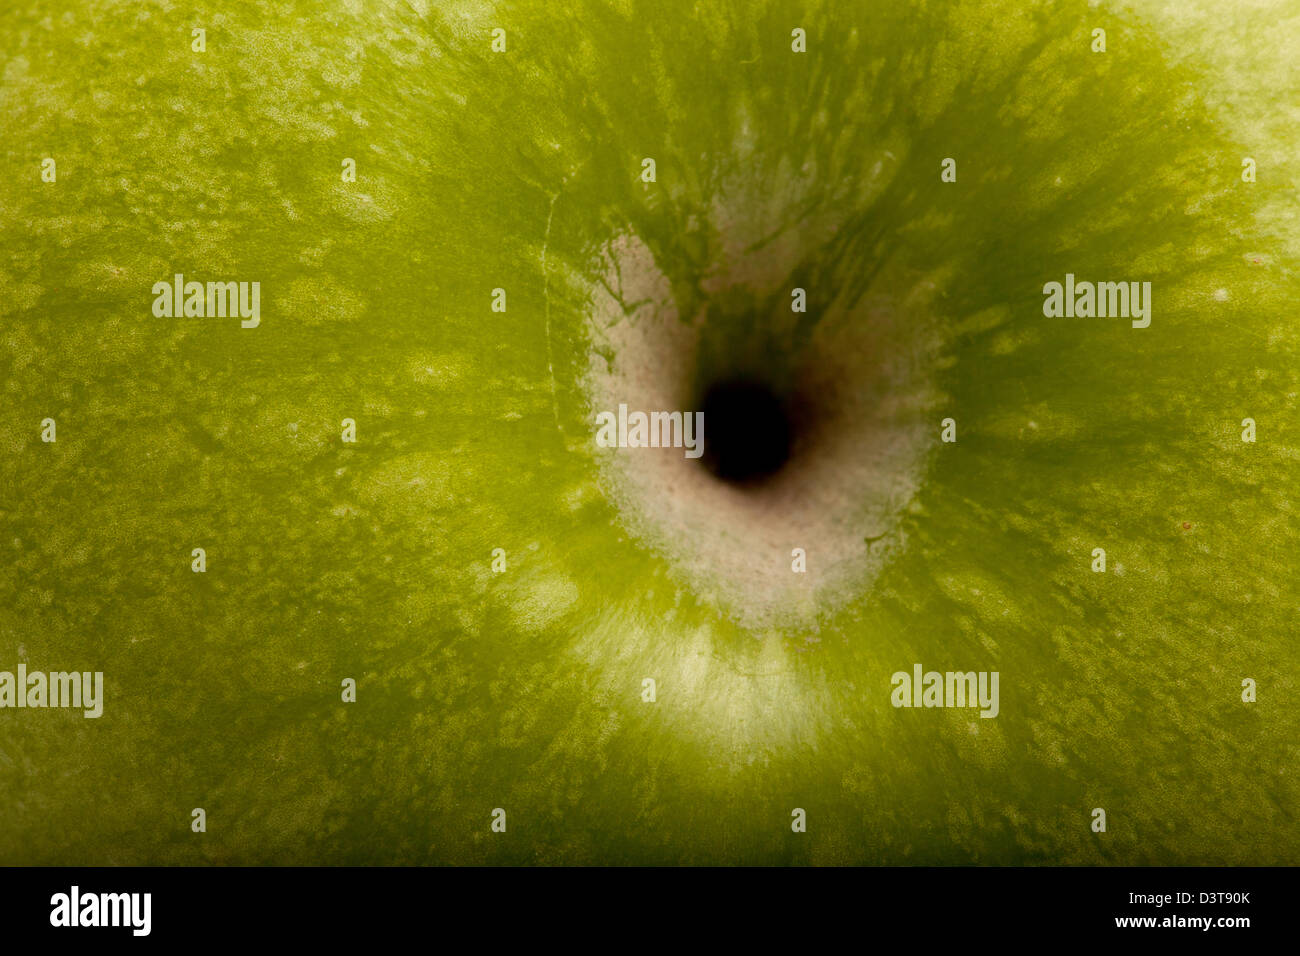 Top of a Granny Smith apple Stock Photo